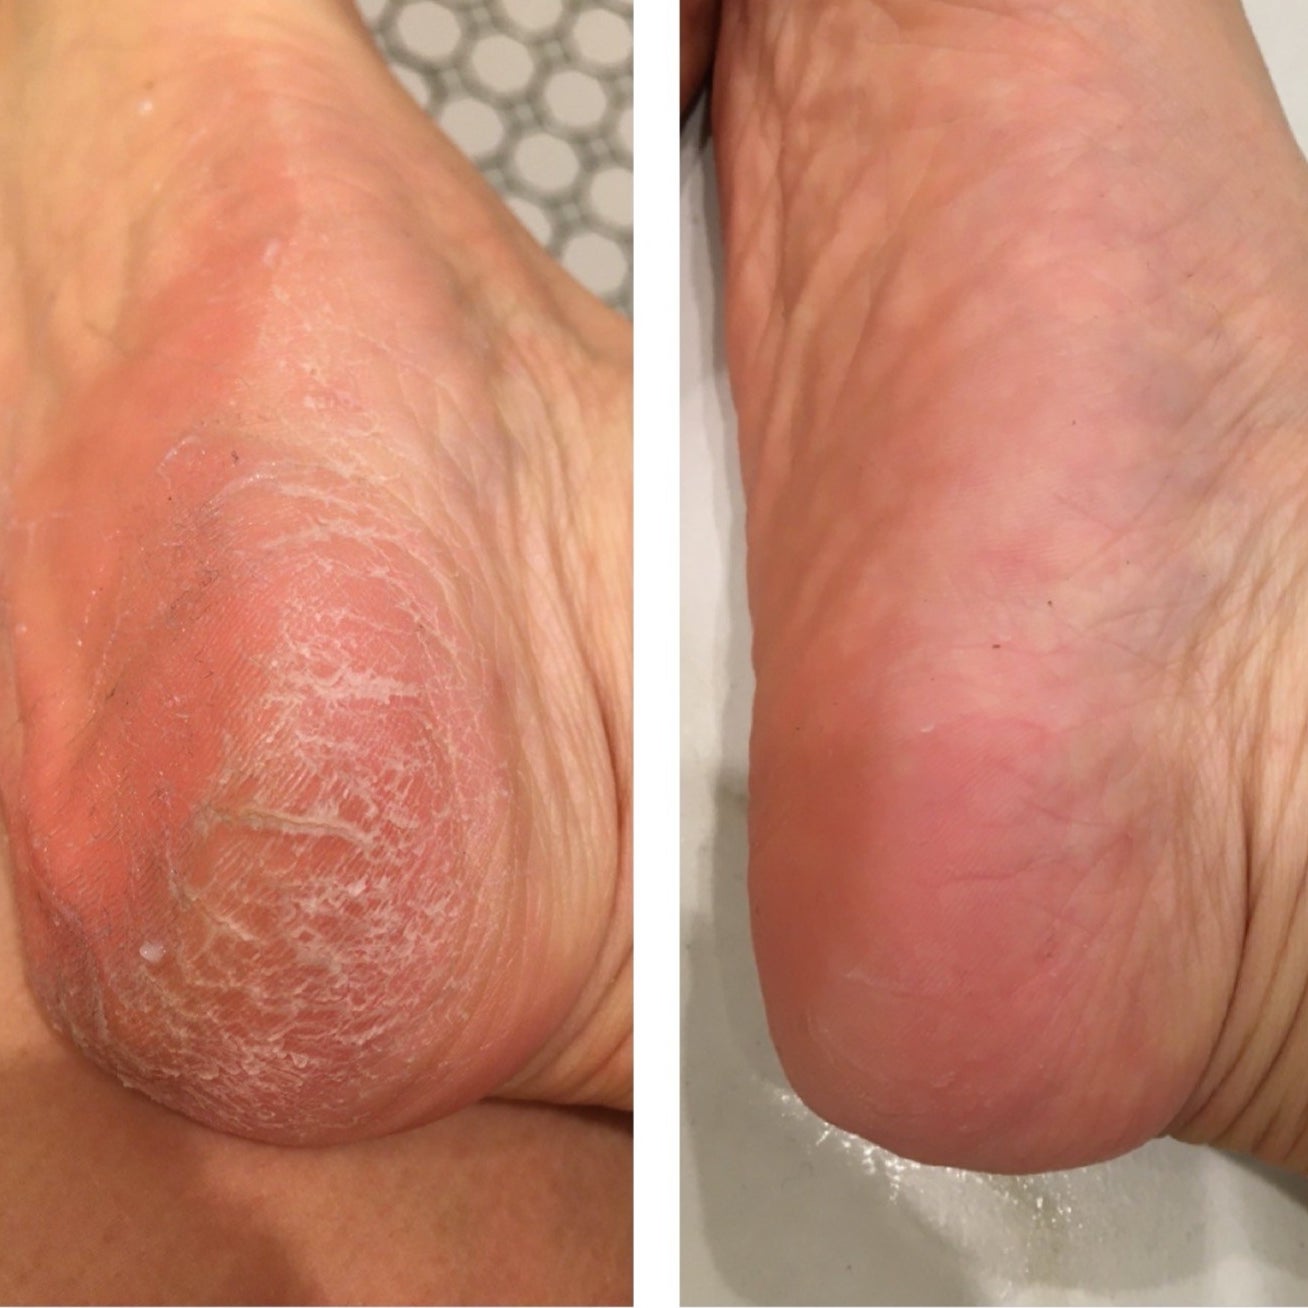 reviewer showing heel with dry cracked skin before using the remover and smooth heel after using the remover